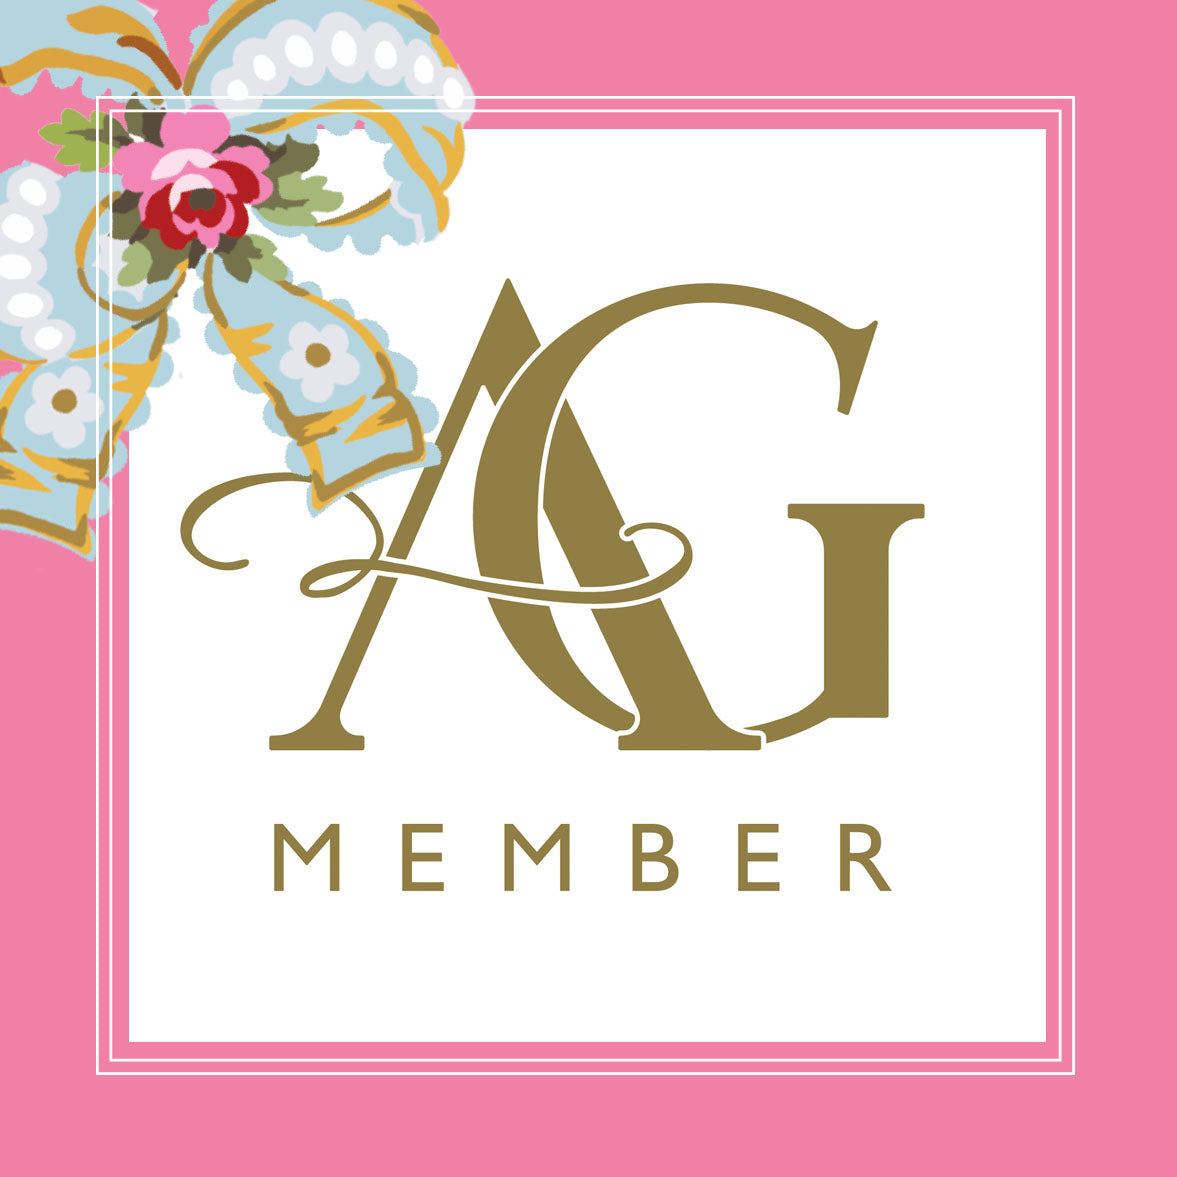 Anna Griffin Gift AG Membership logo on a pink background offering discounts and crafting classes.